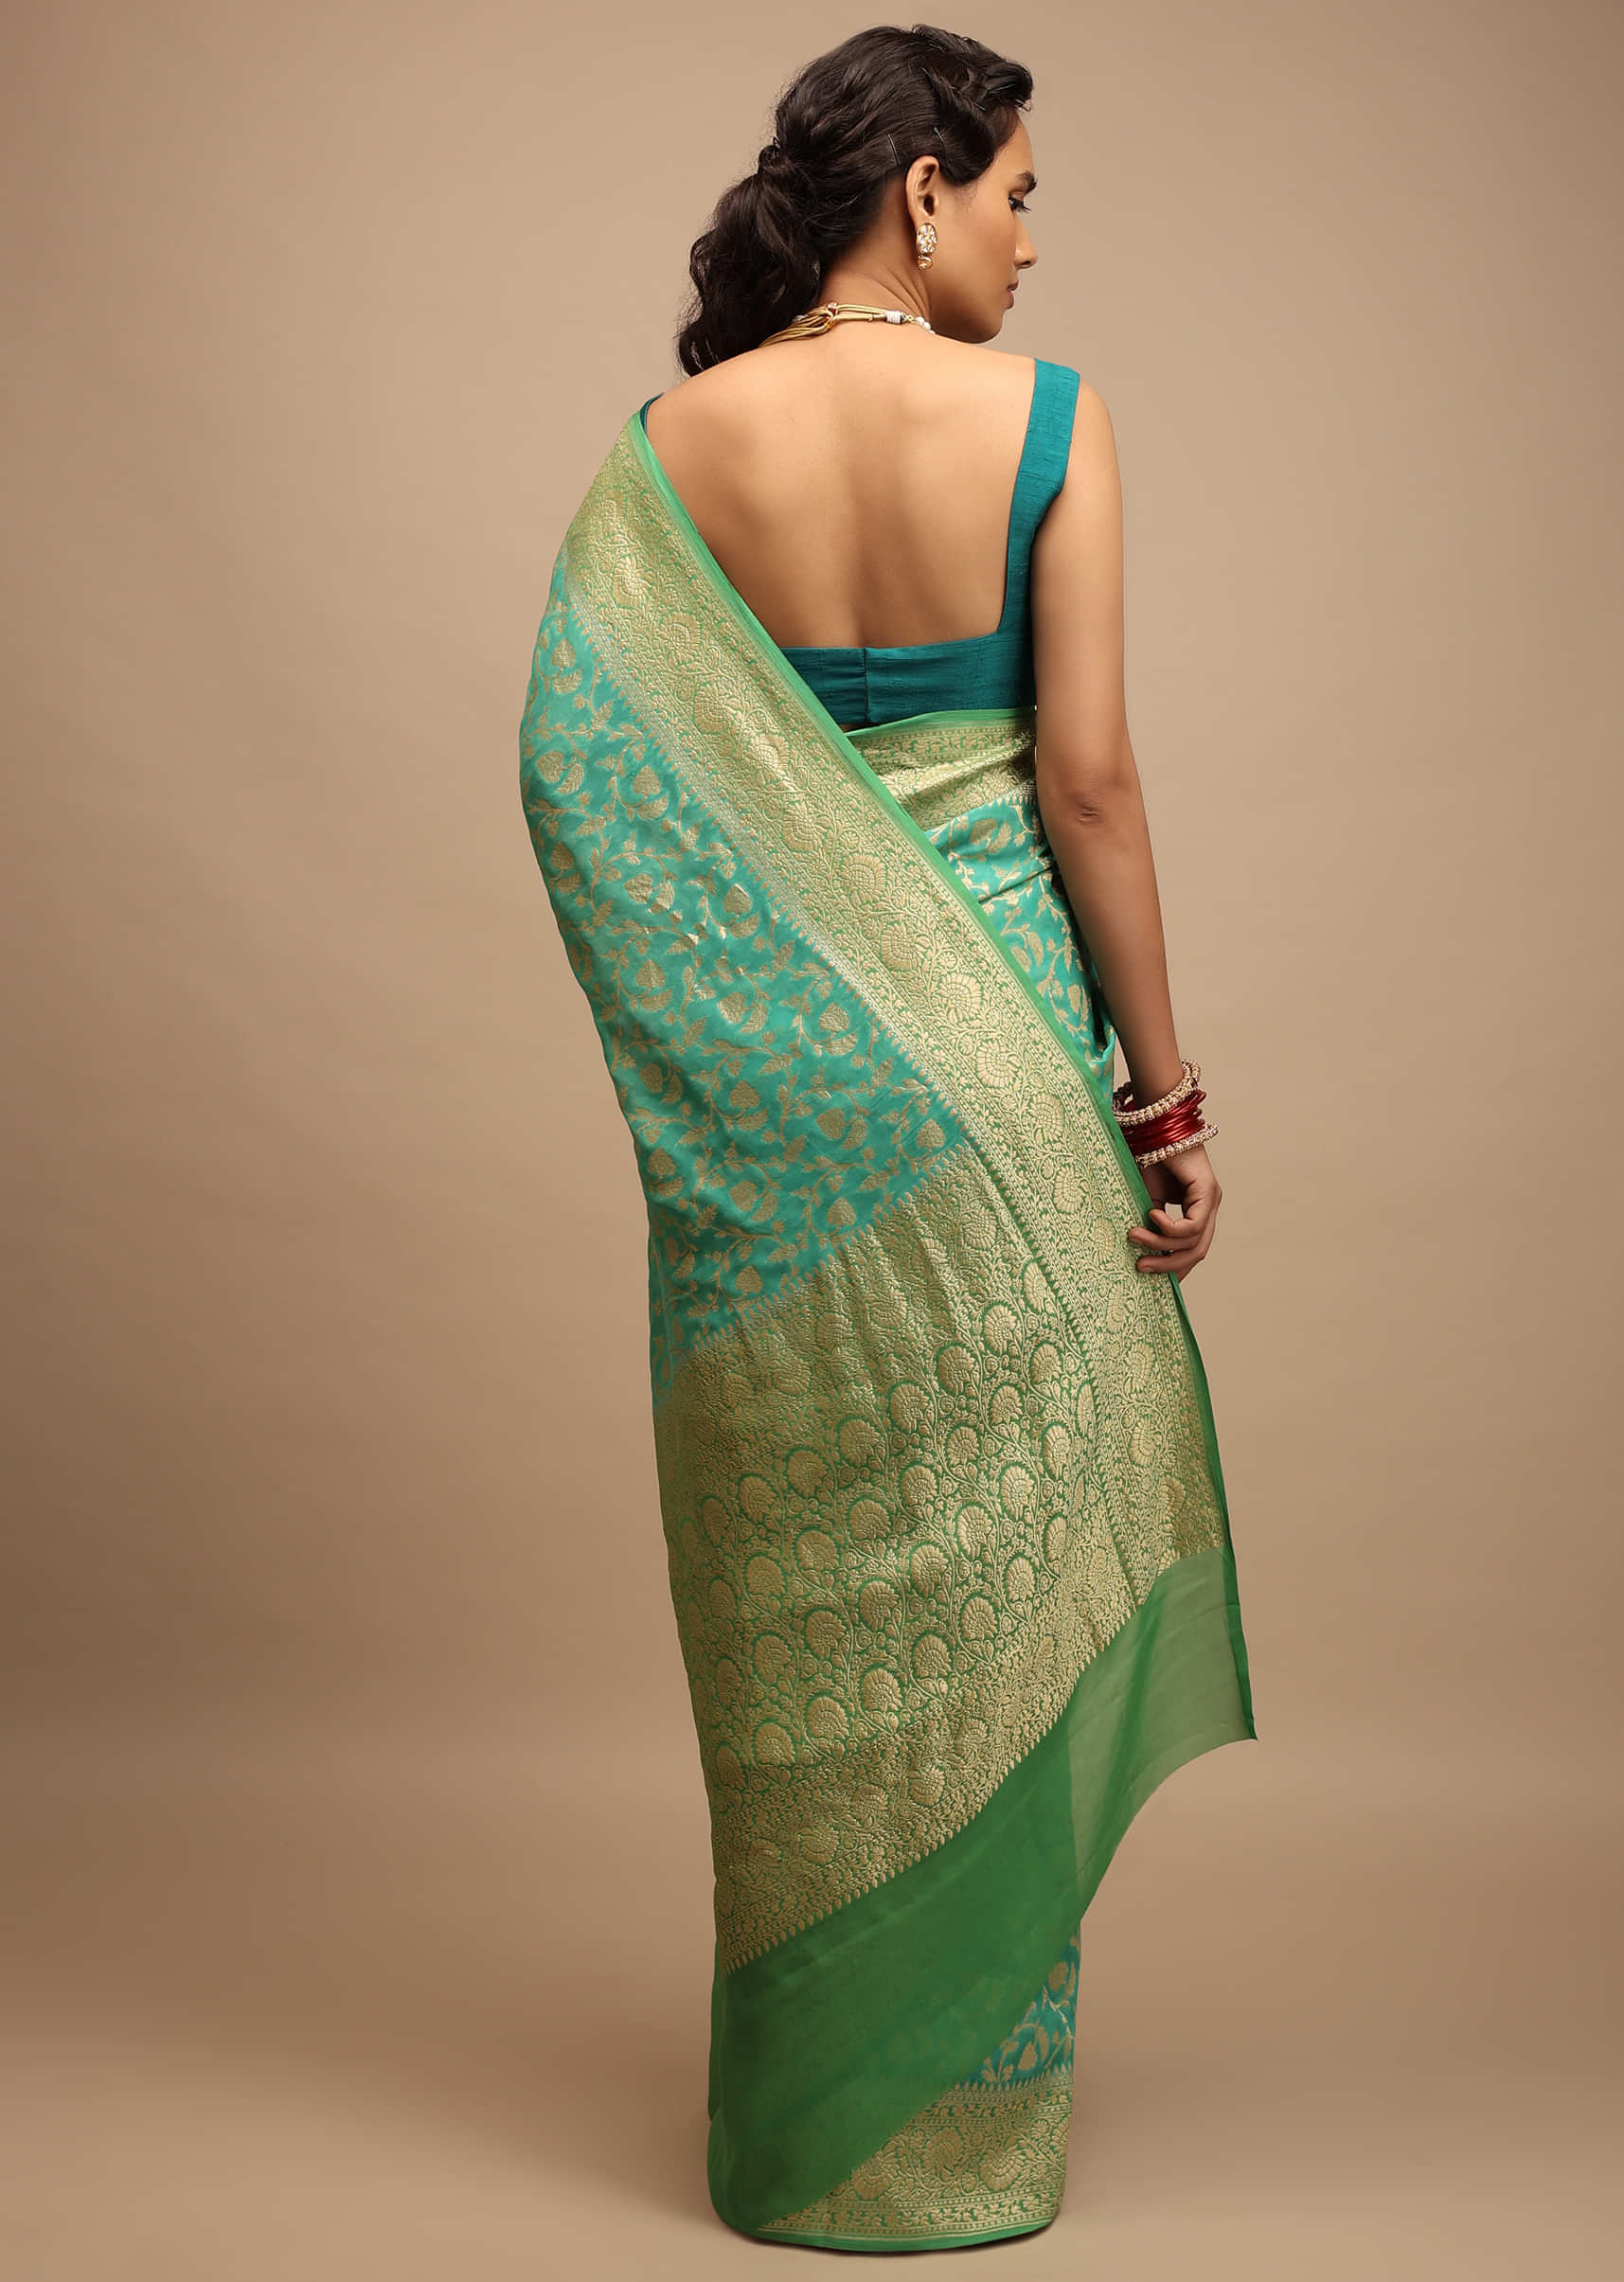 Turquoise Green Saree In Georgette With Woven Floral Jaal